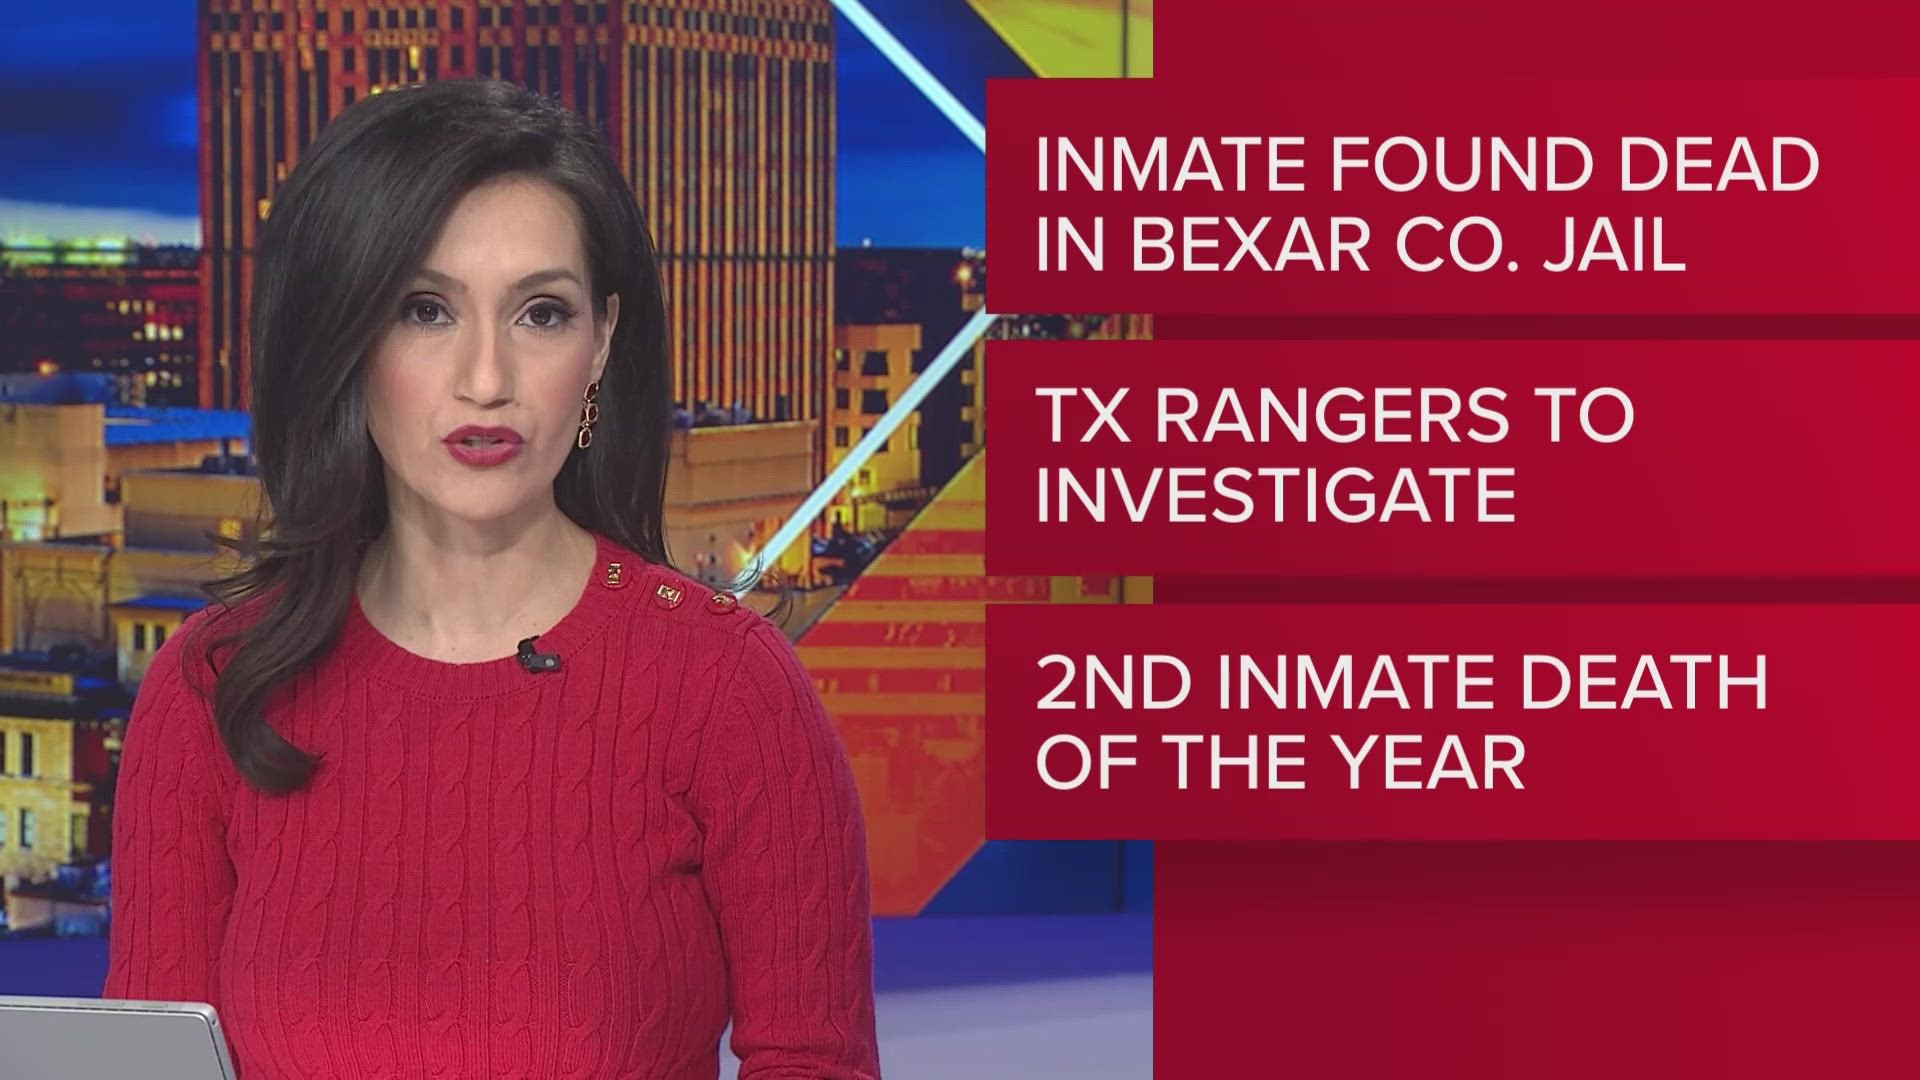 Daniel Pentkwoski is the second person to die while jailed in Bexar County this year.